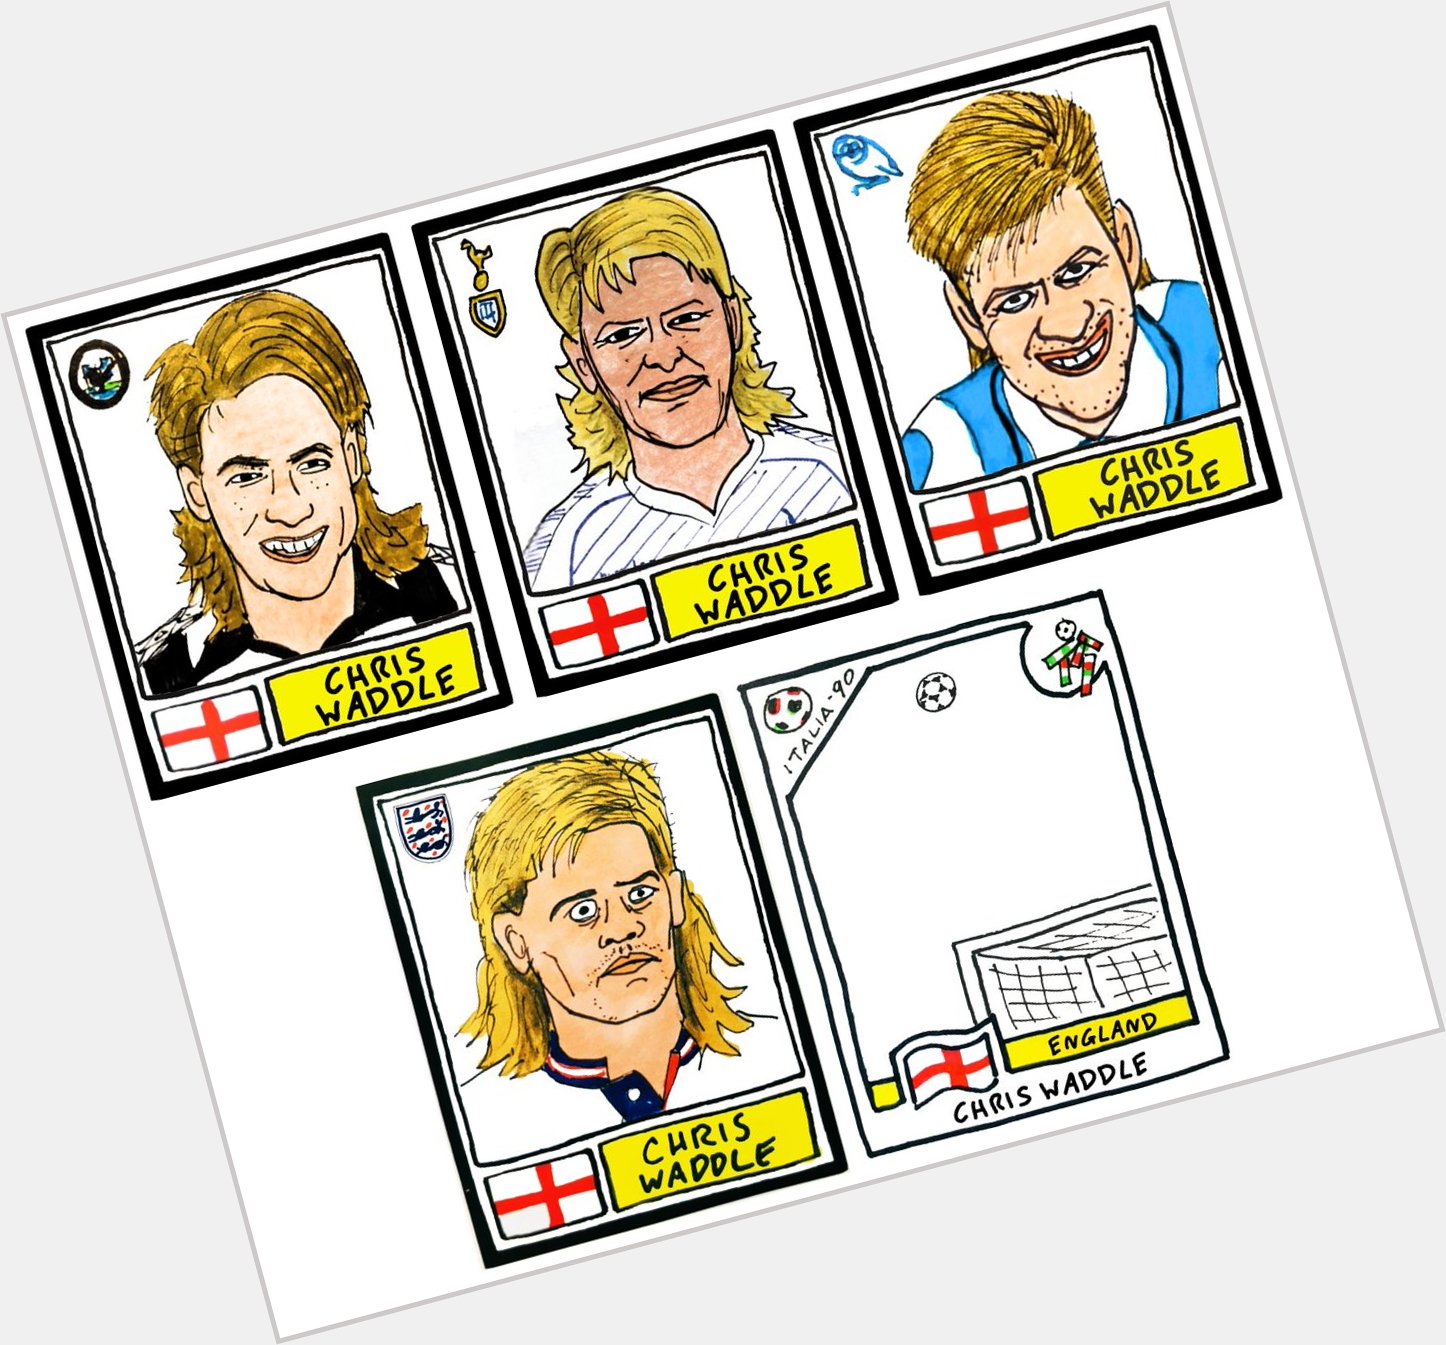 Happy Birthday to Chris Waddle who, let\s be honest, we\ve never quite got the hang of drawing 